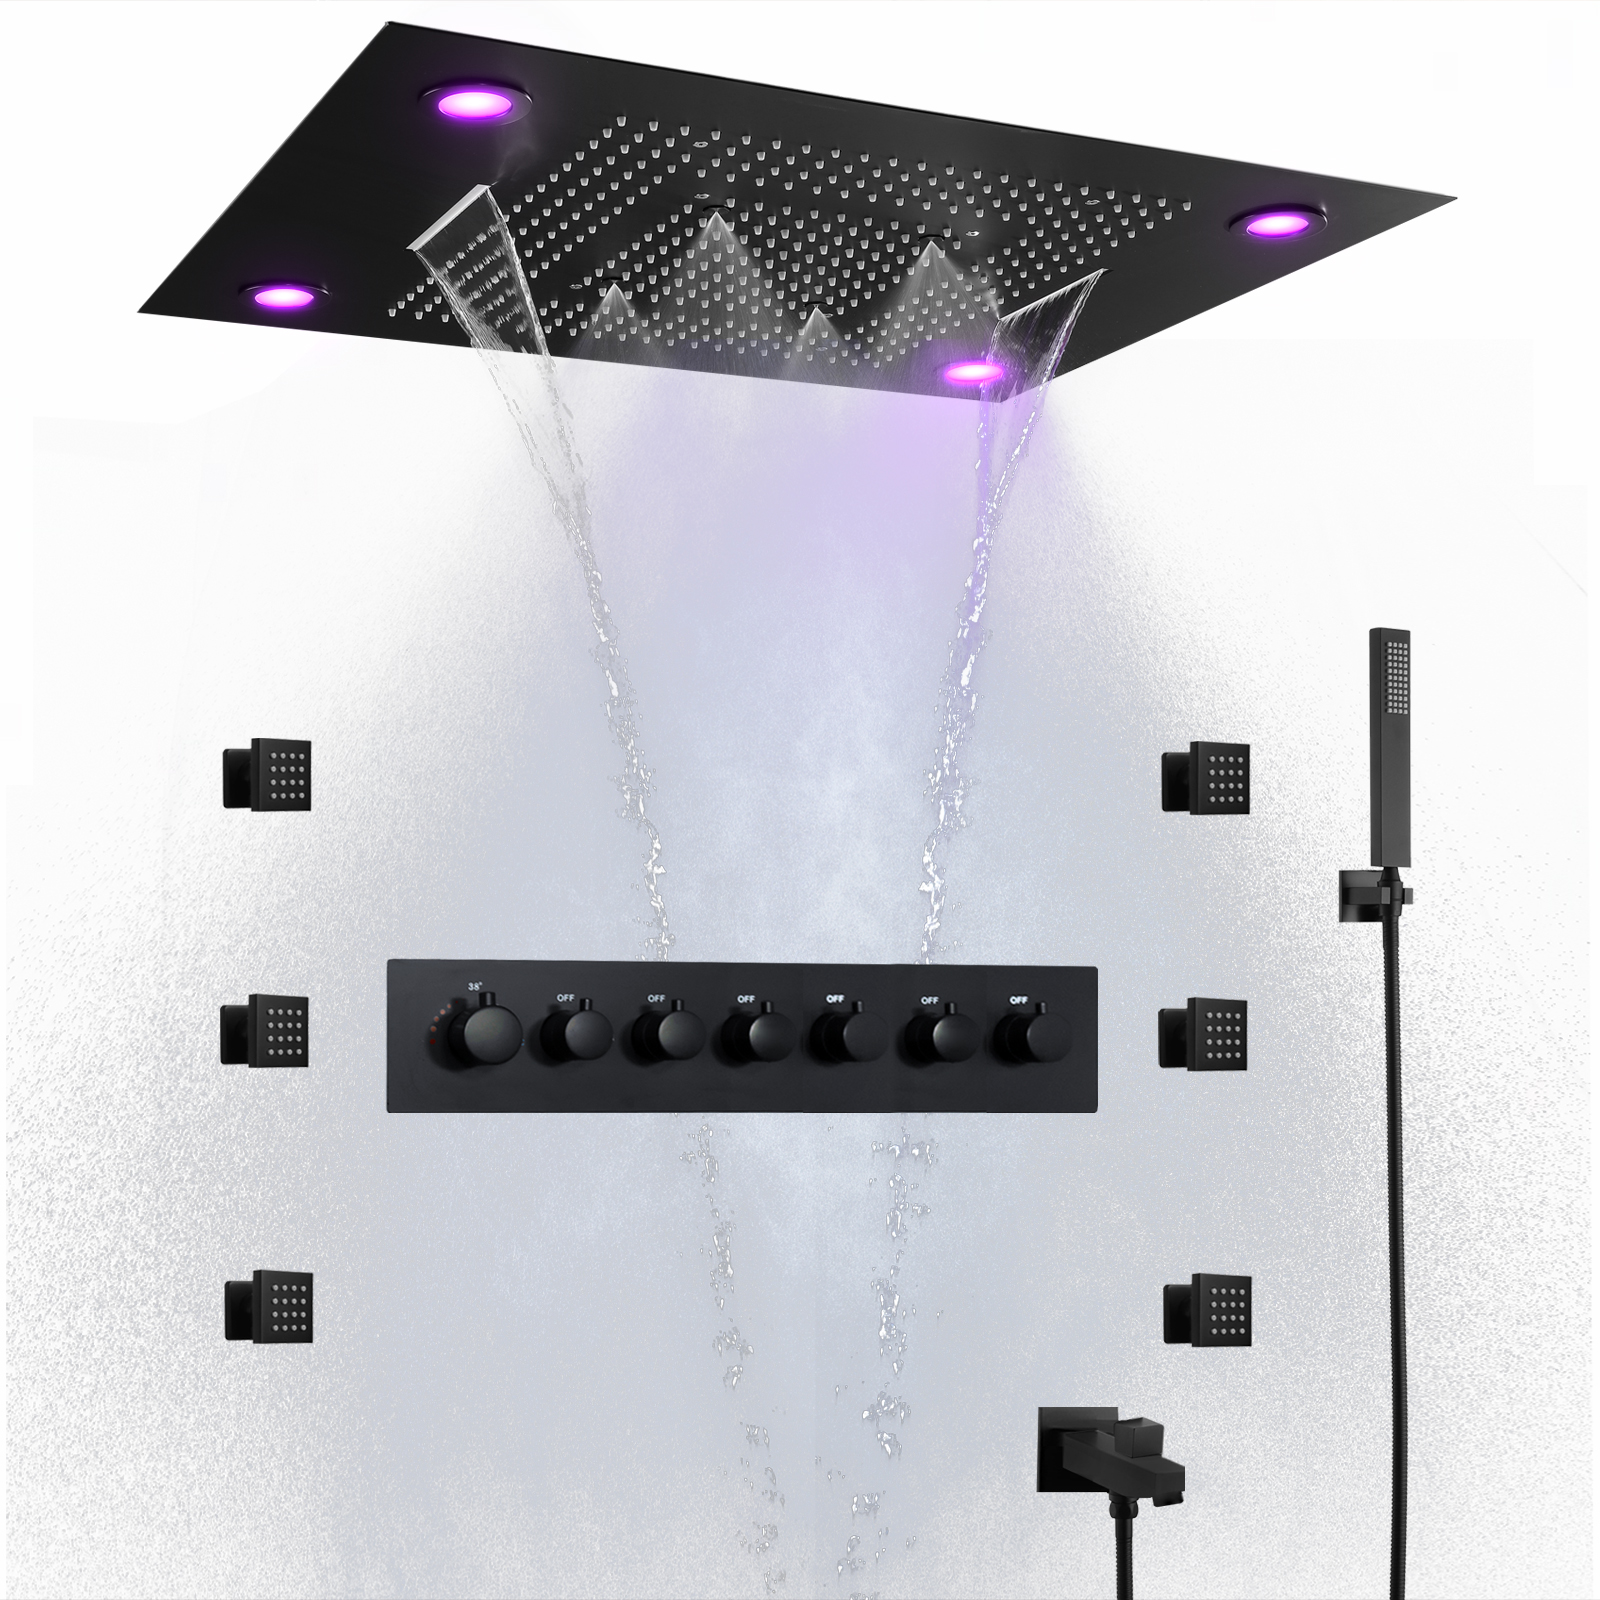 800*600MM Black Shower Head LED Bathroom Thermostatic Multifunction Shower System With Shower Body Jets